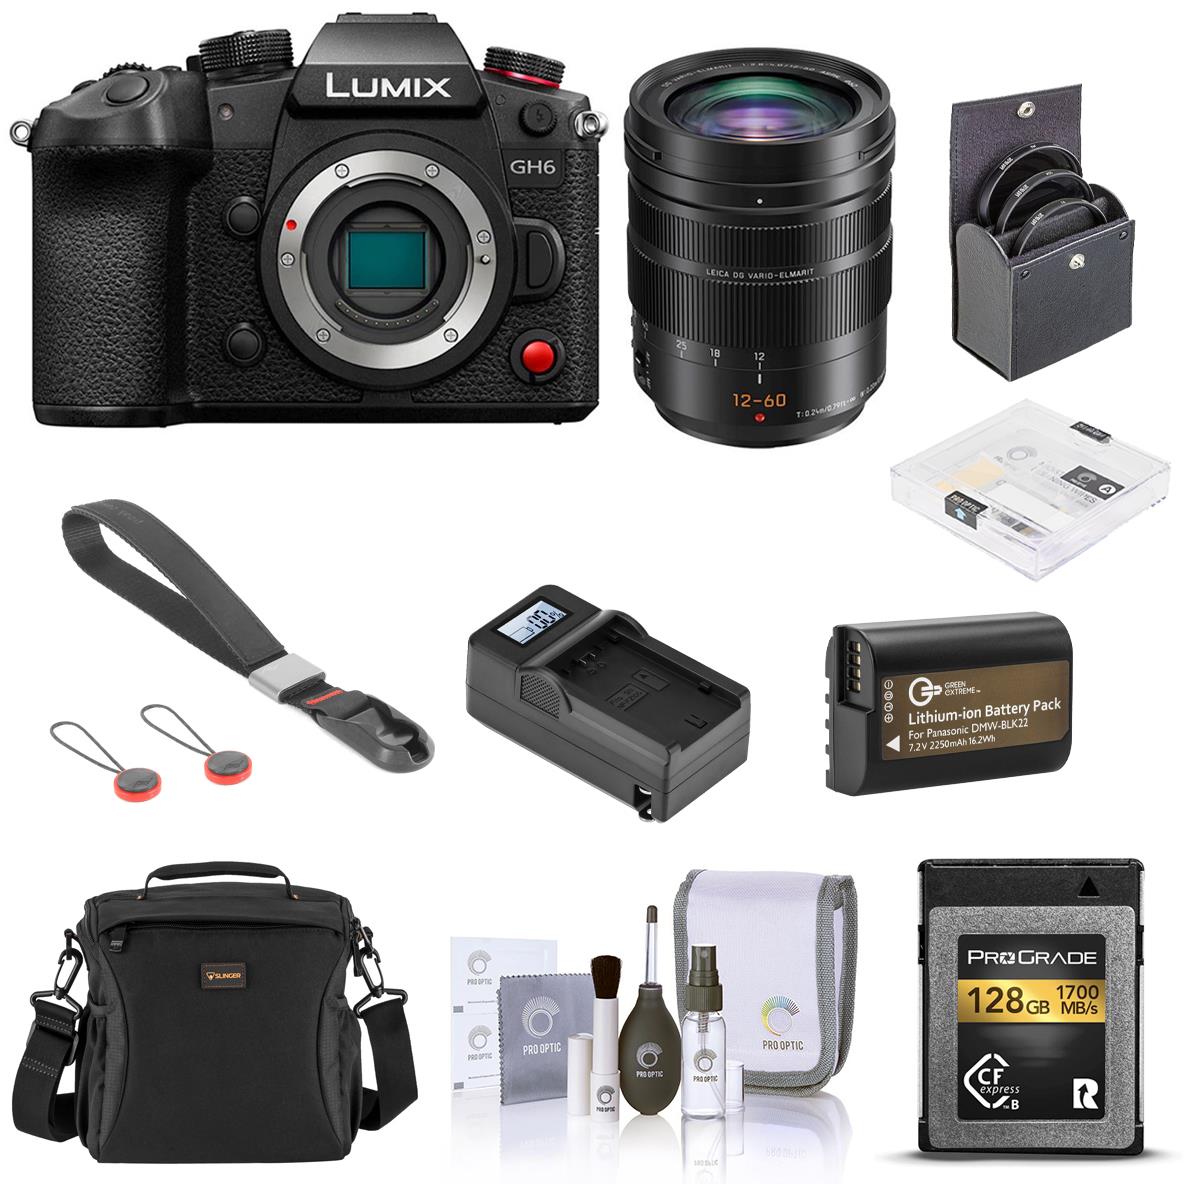 Image of Panasonic Lumix GH6 Mirrorless Camera with 12-60mm Lens with Essential Acc. Kit